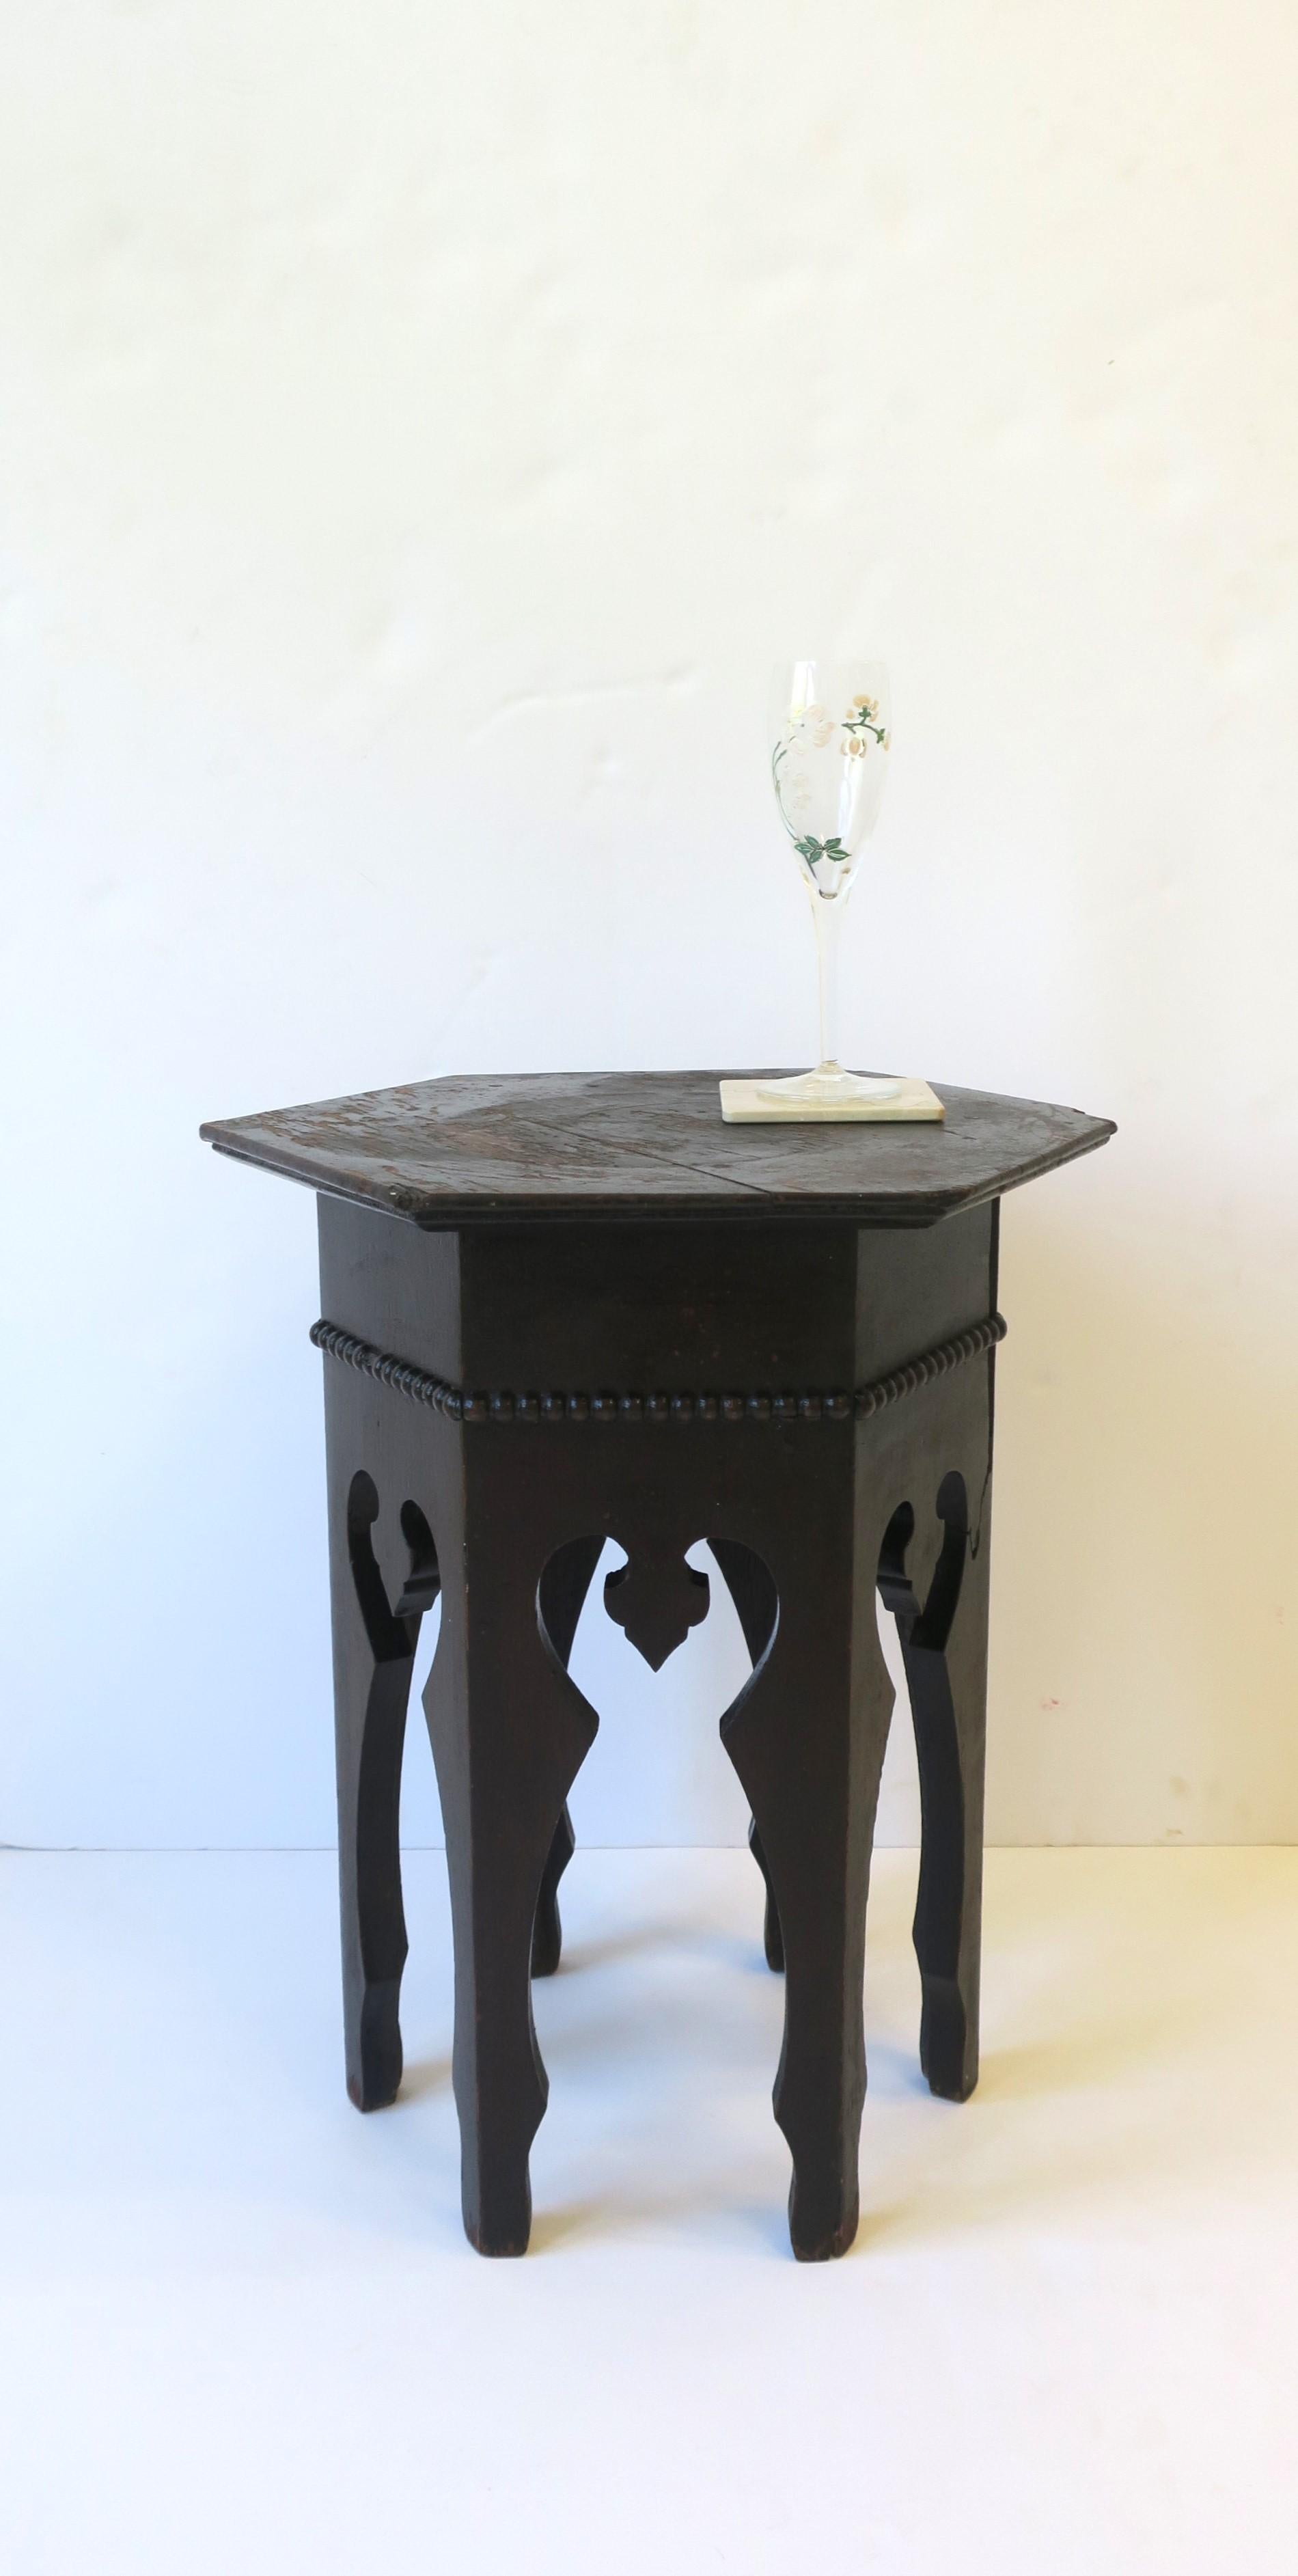 Hand-Crafted Tabouret Moroccan Moorish Drinks Side Table, circa Early 20th Century